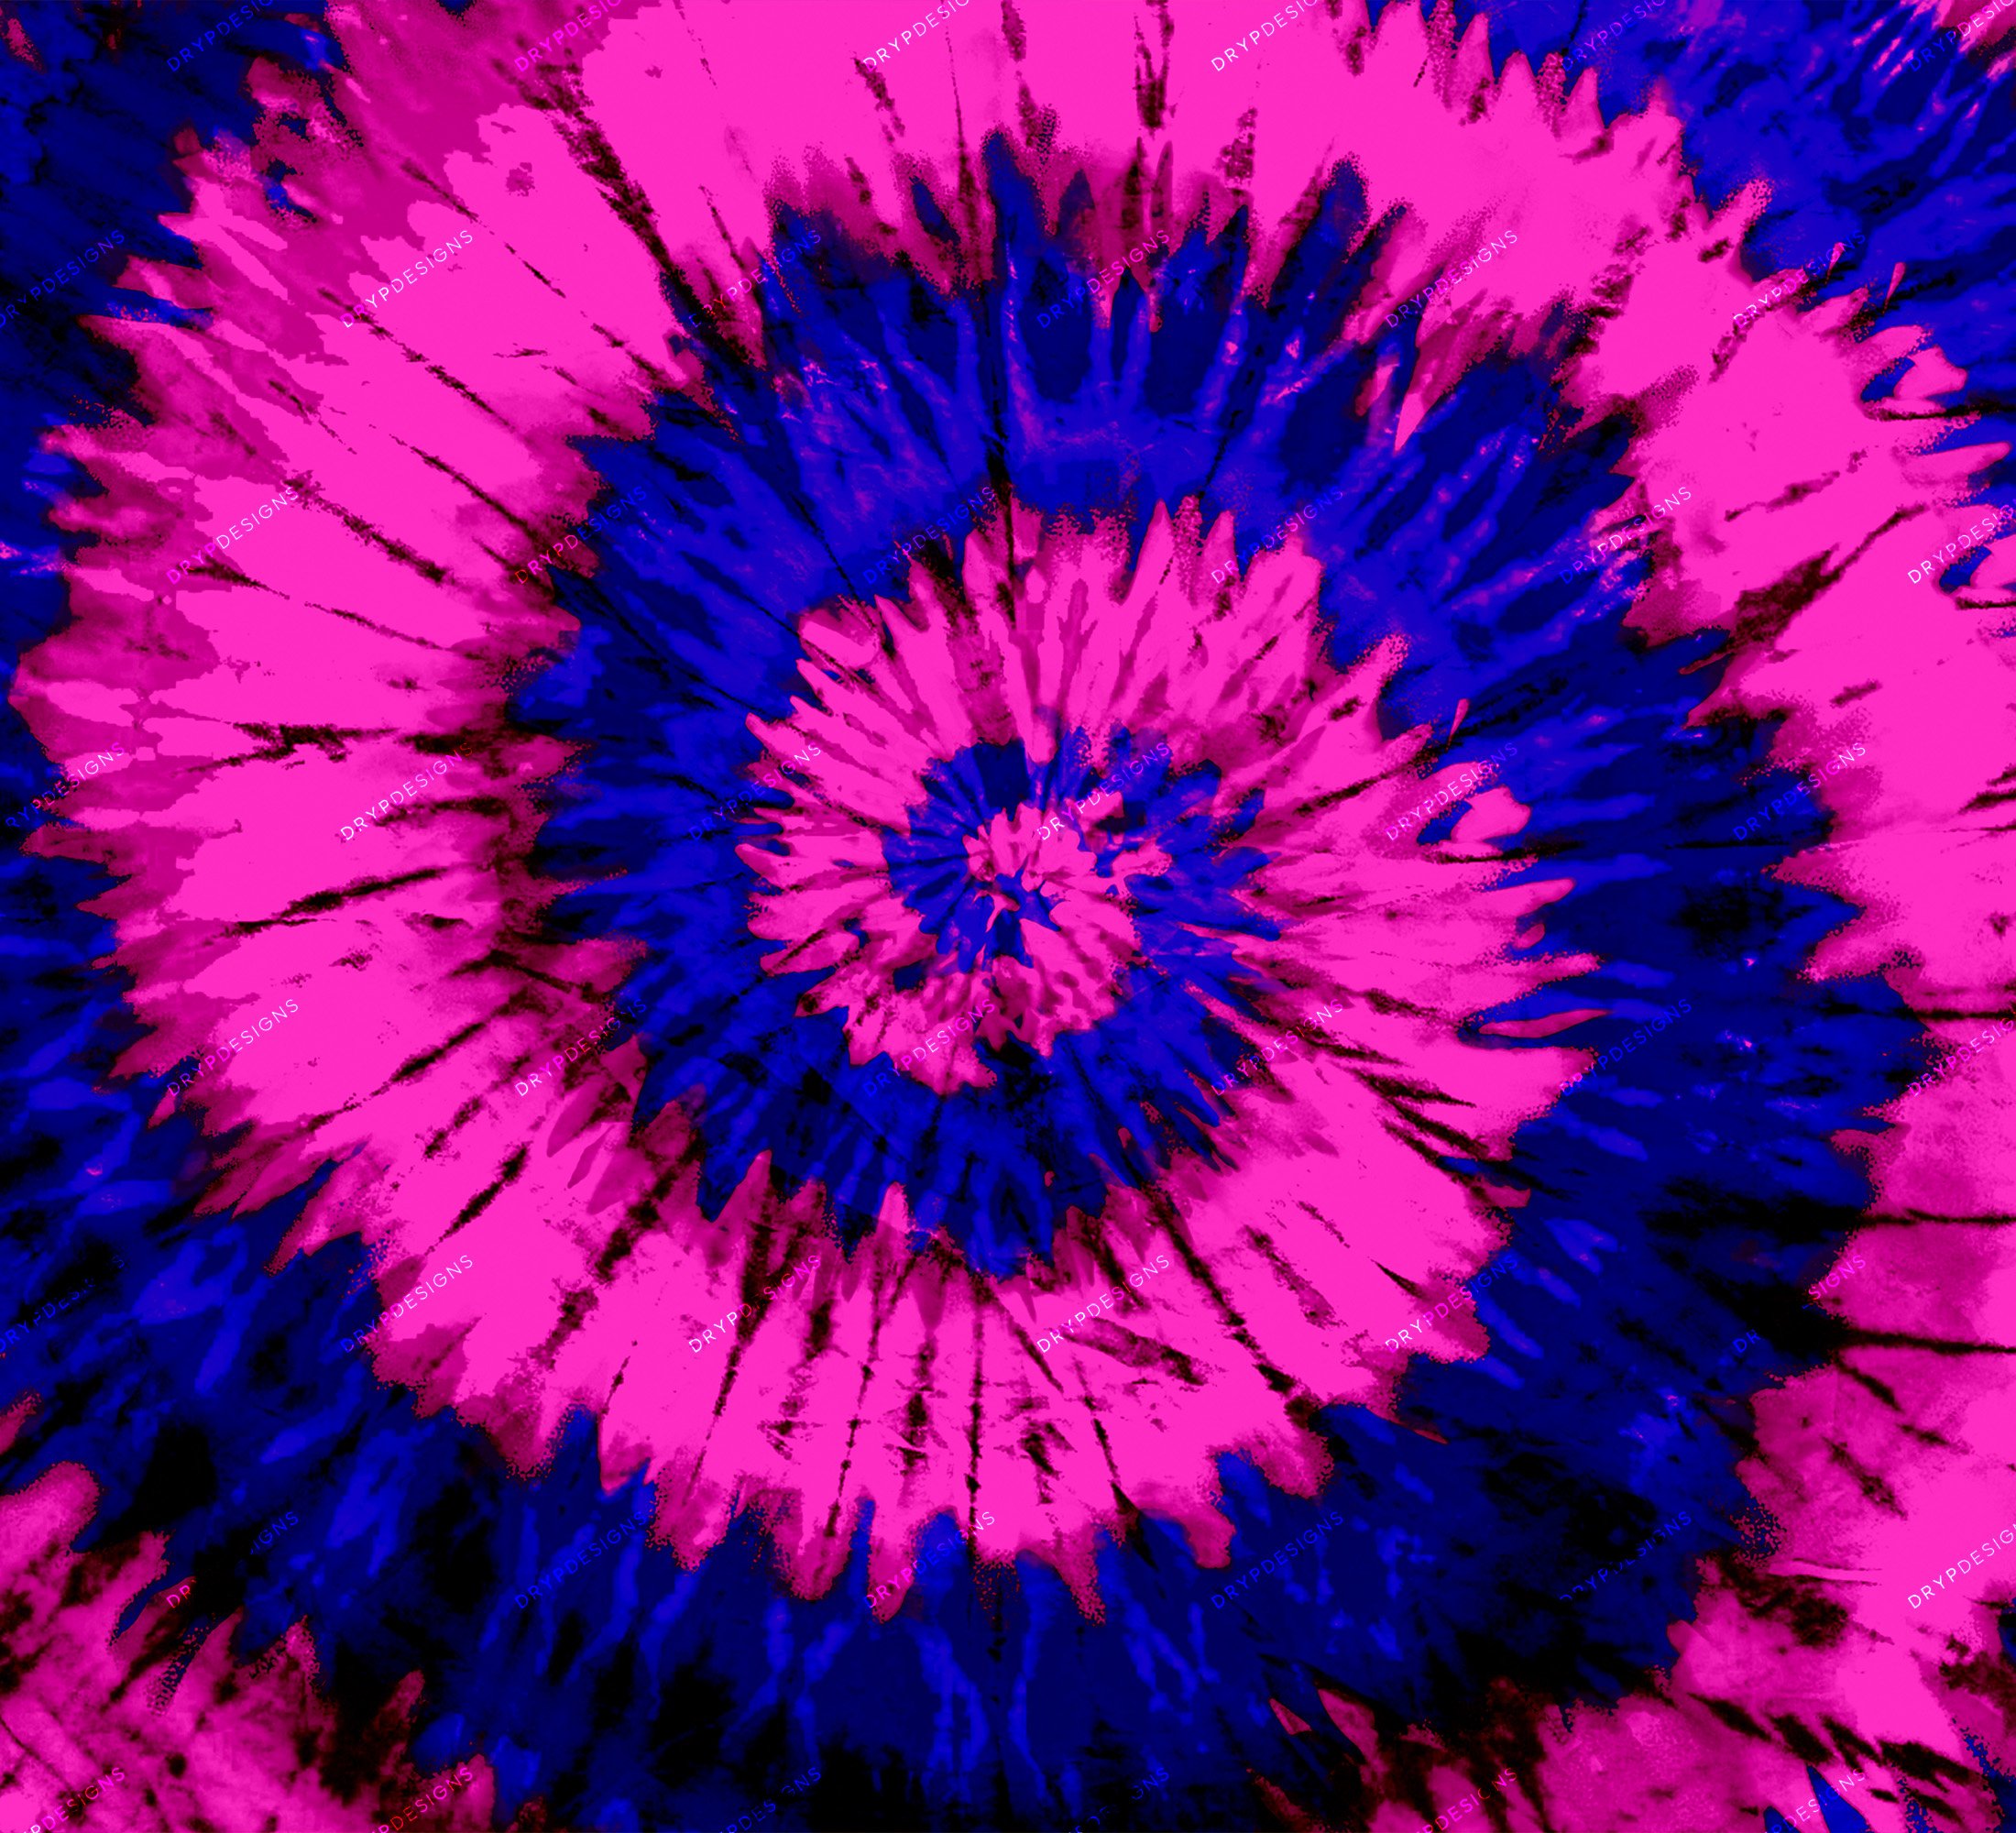 Blue Tie Dye Background Images HD Pictures and Wallpaper For Free Download   Pngtree